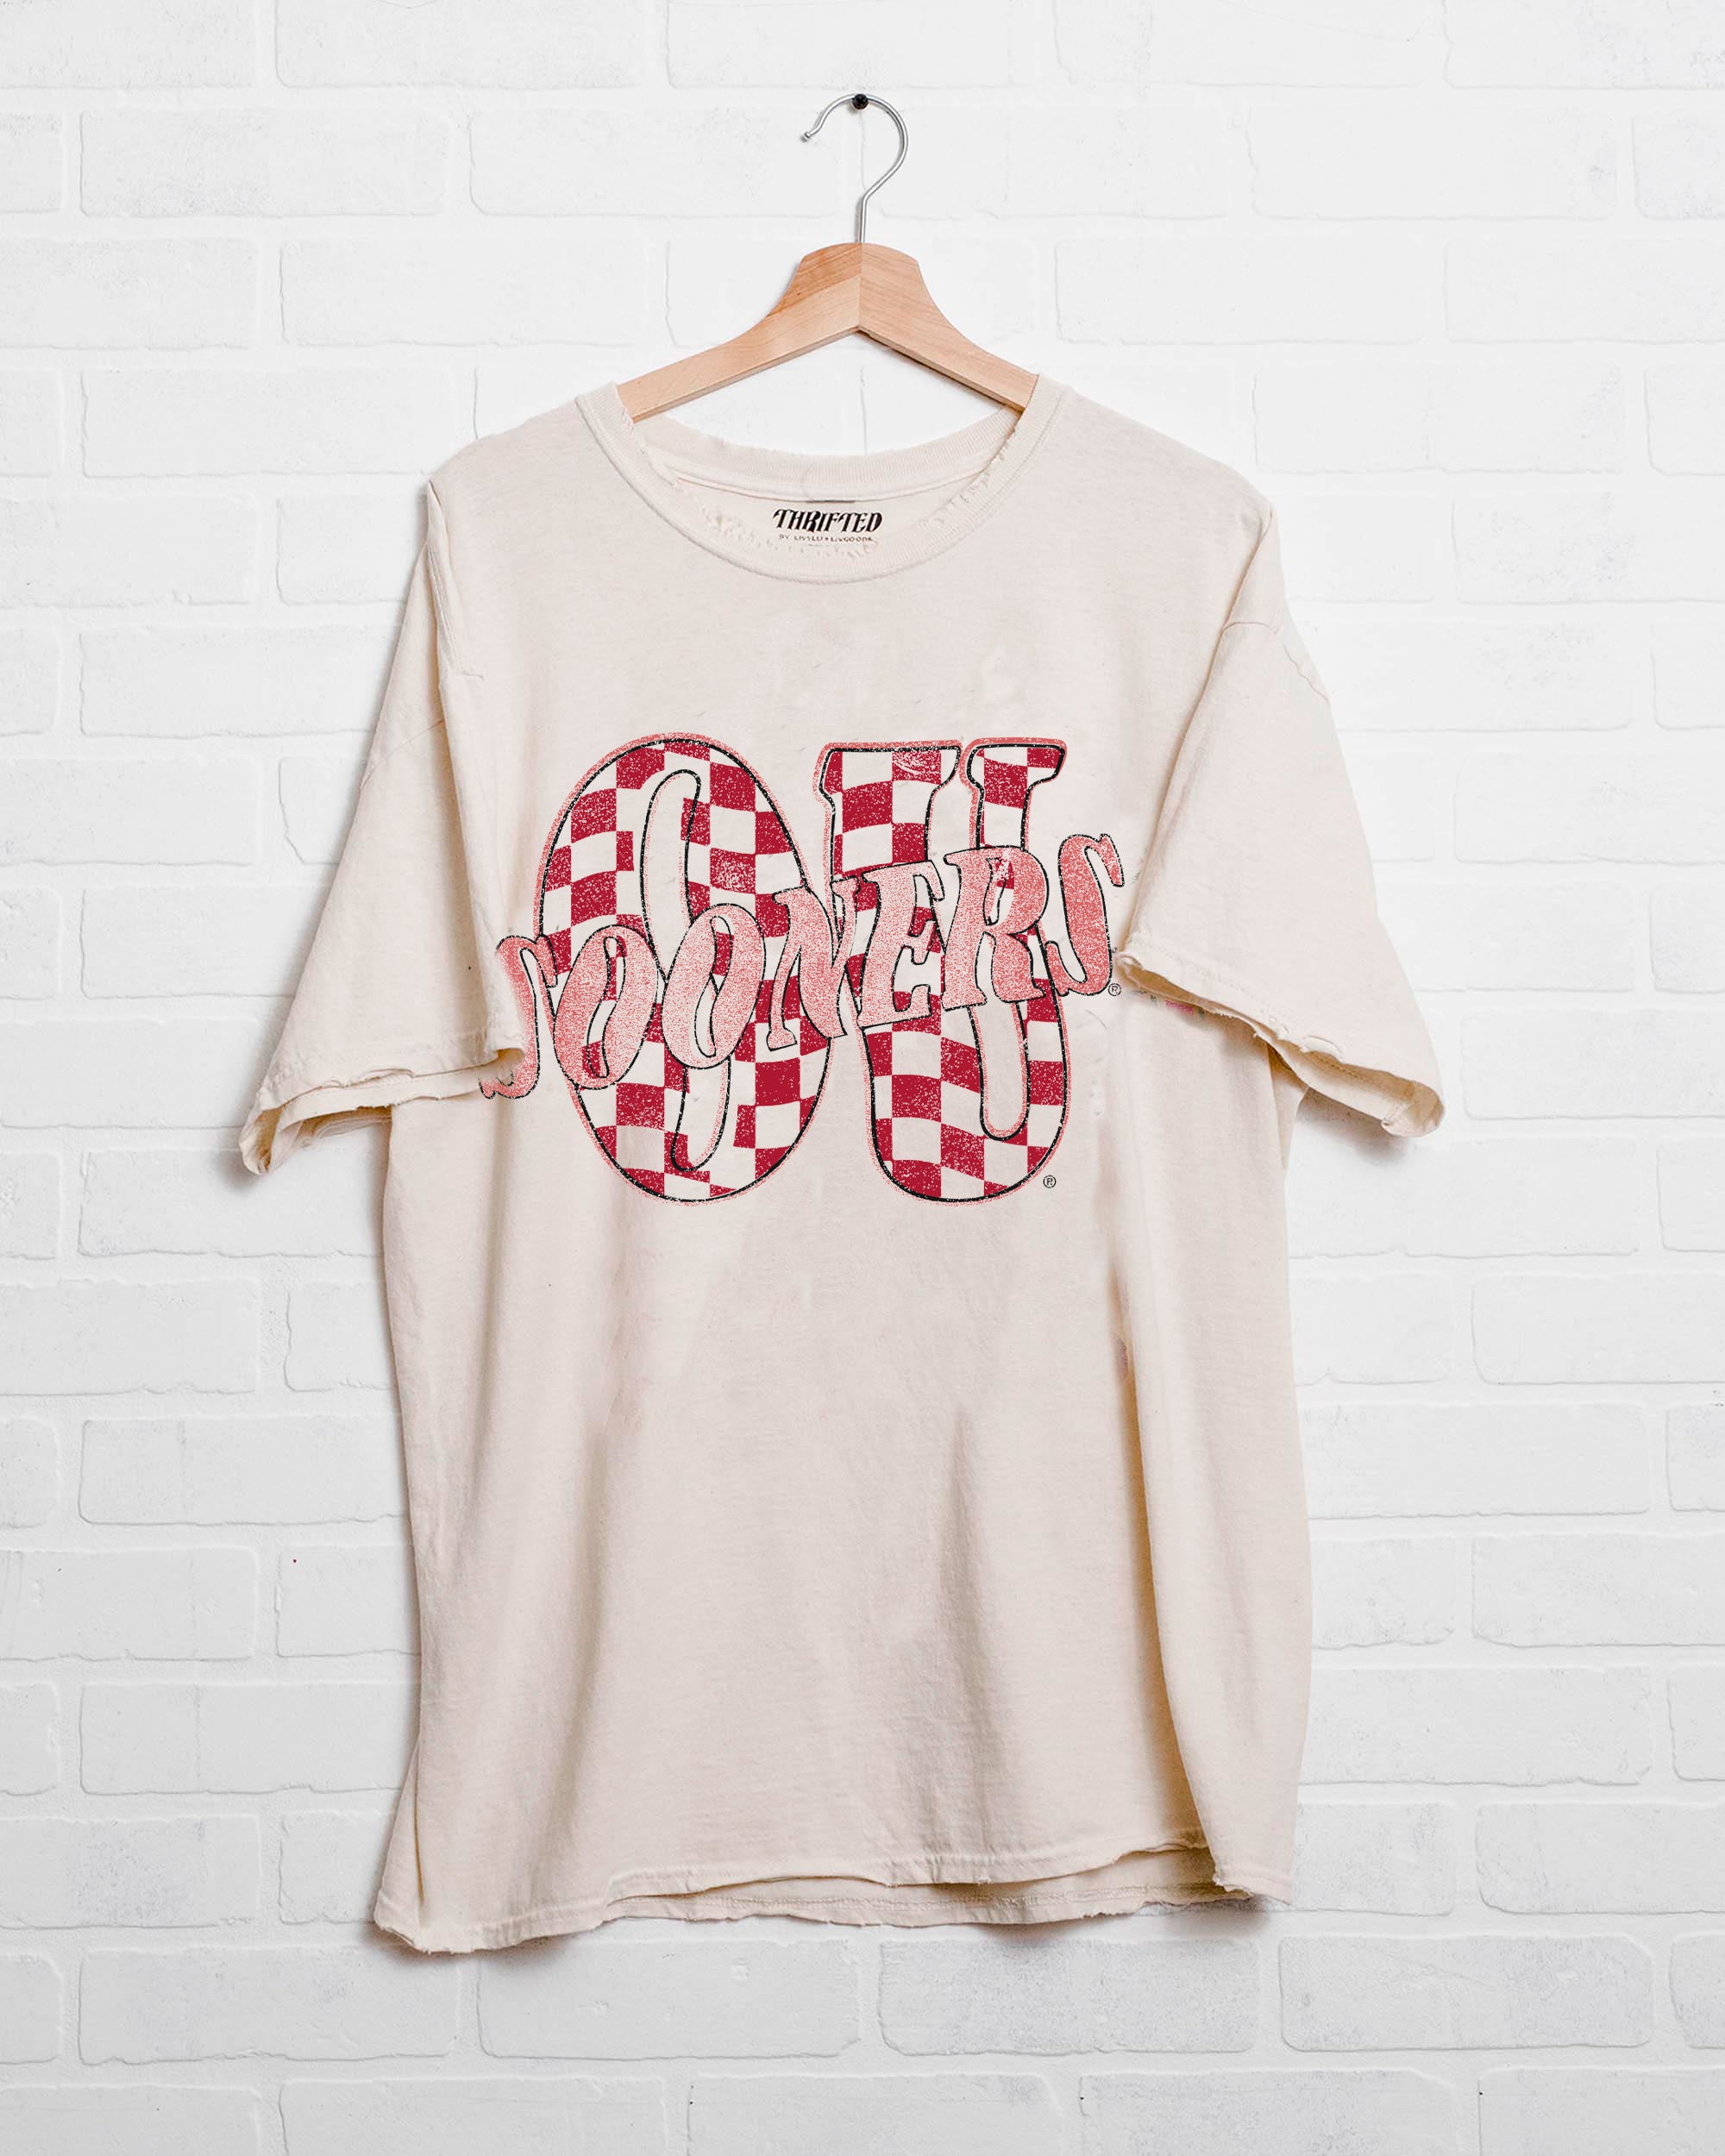 OU Sooners Twisted Check Off White Thrifted Tee - shoplivylu